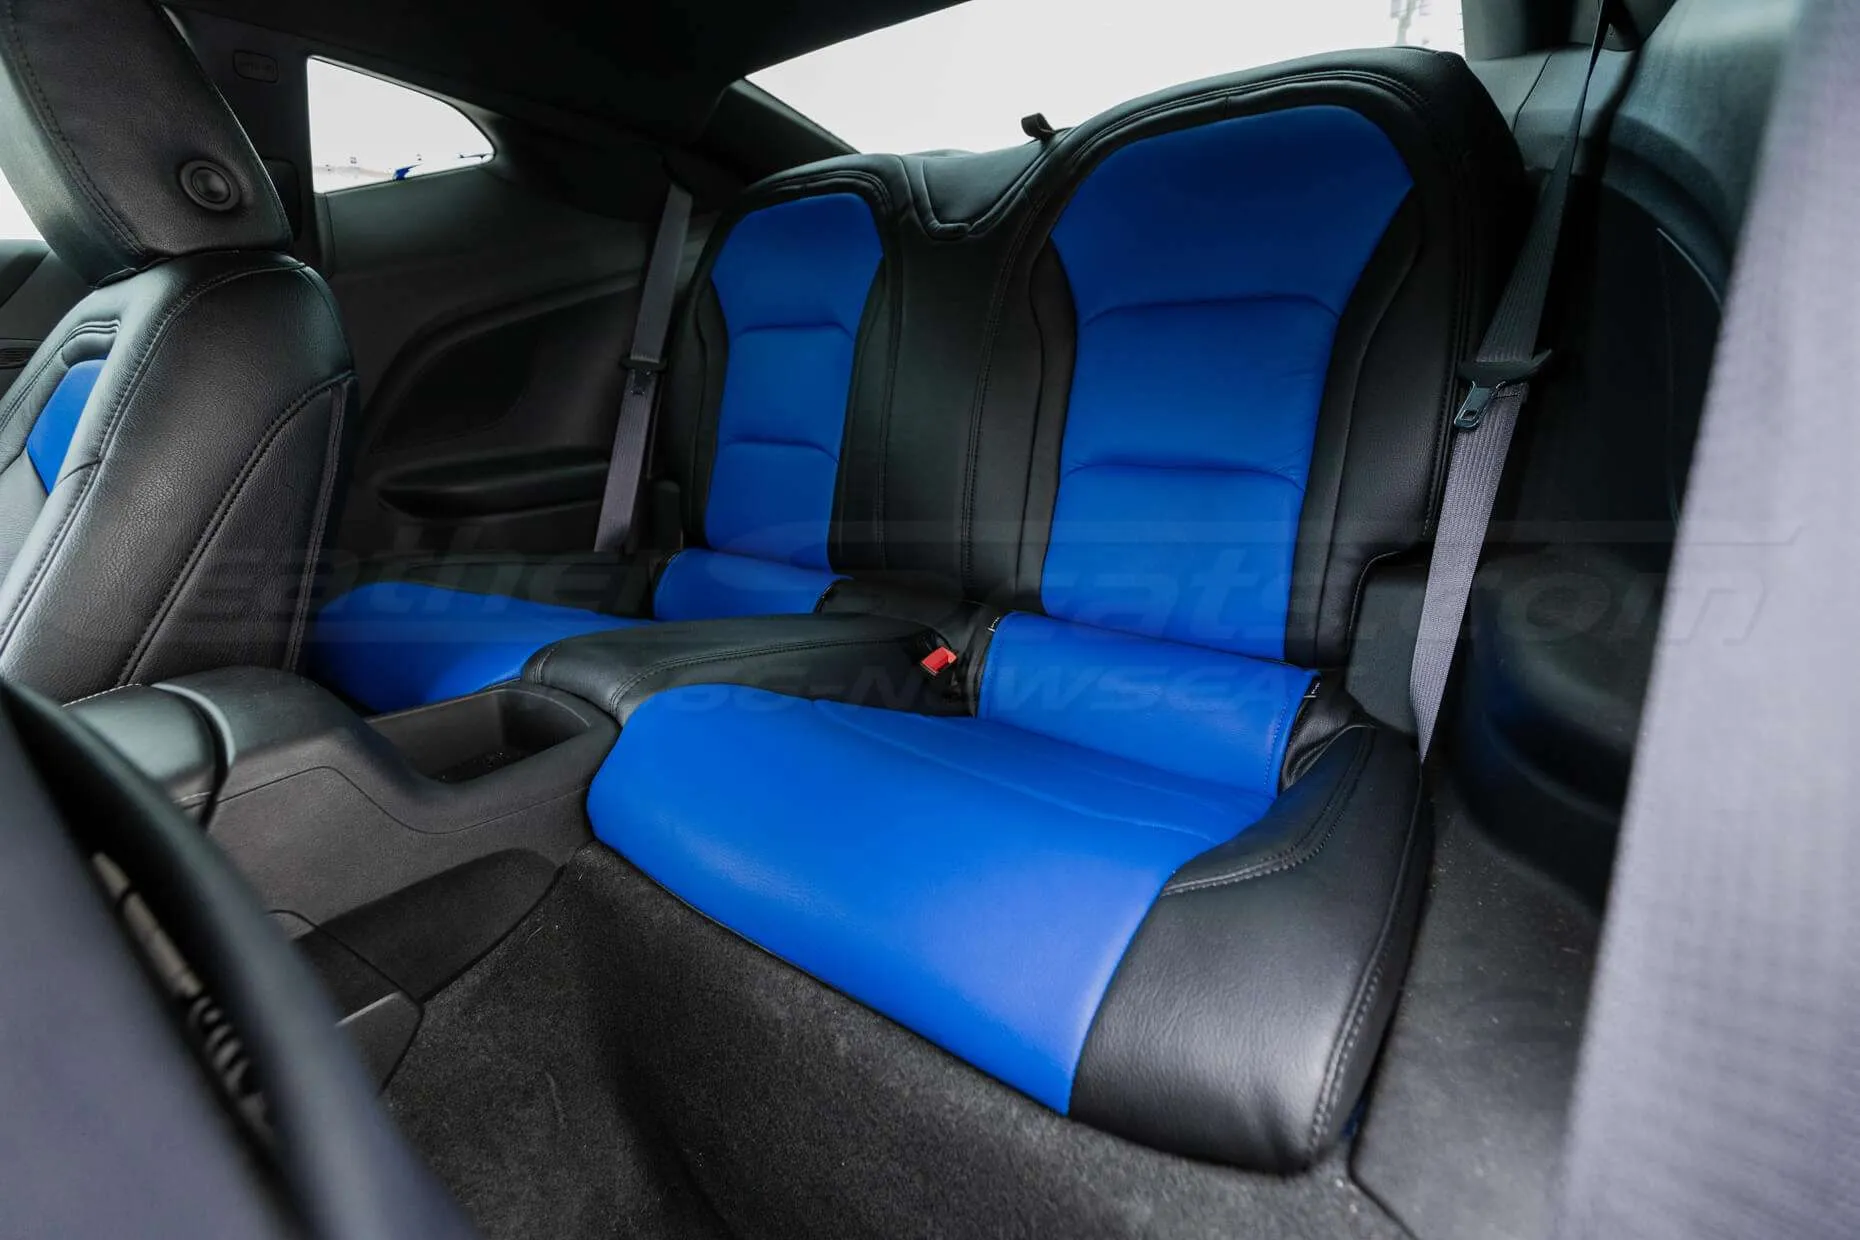 Camaro rear seats from driver side